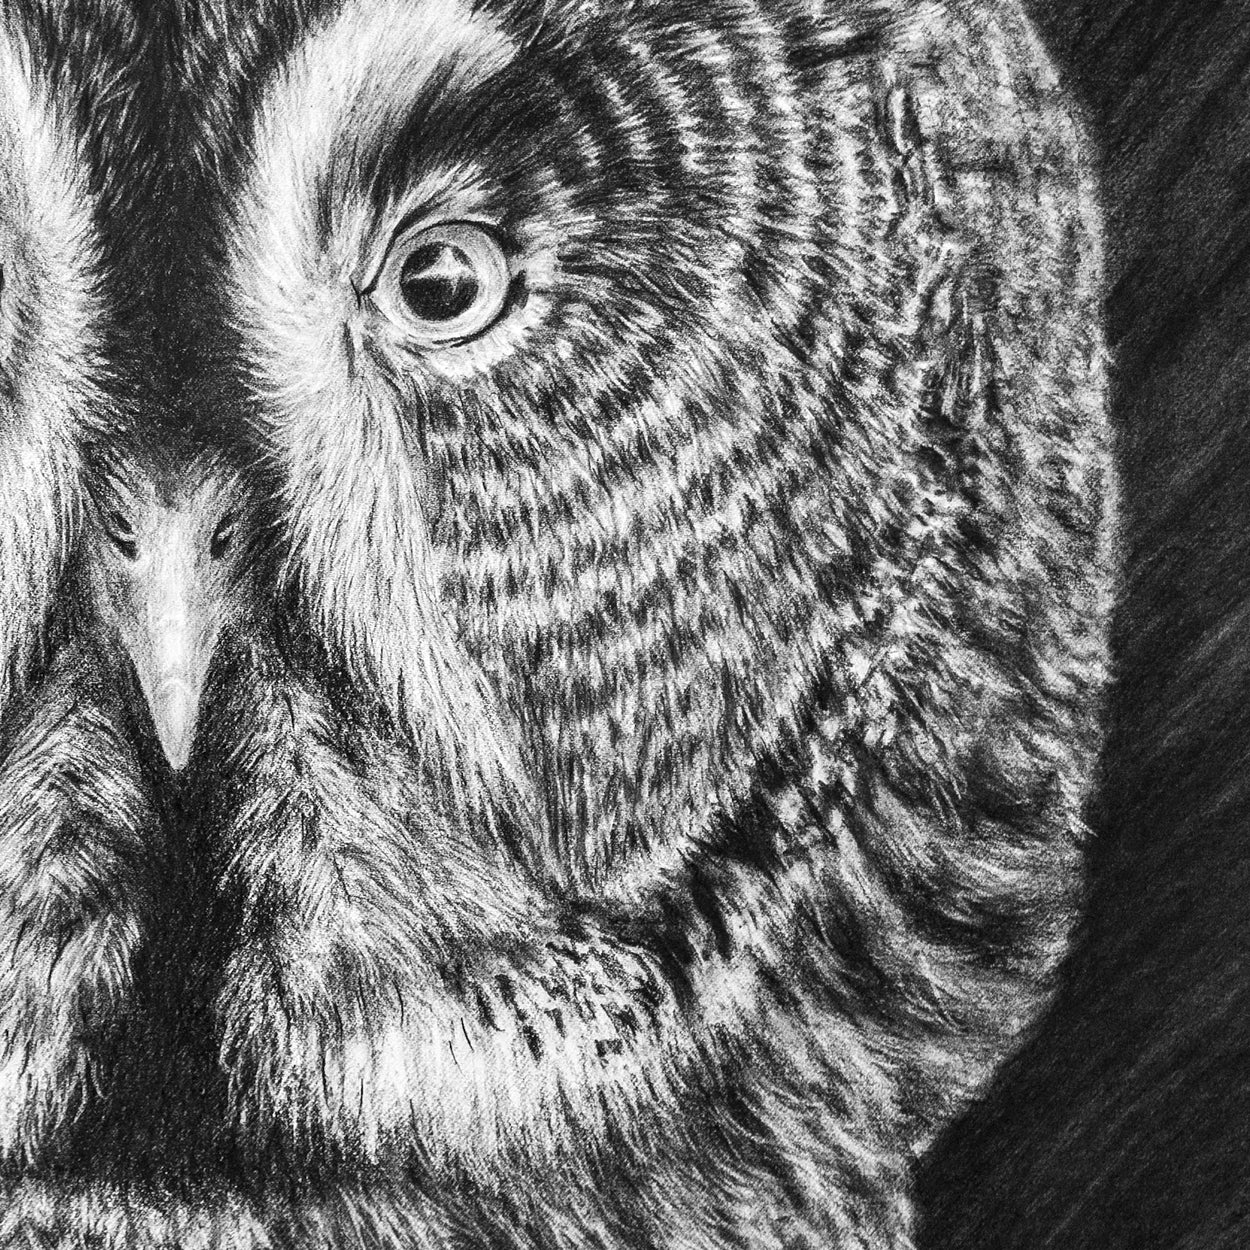 Close-up detail of a charcoal drawing of an eye and beak and half face of a great grey owl